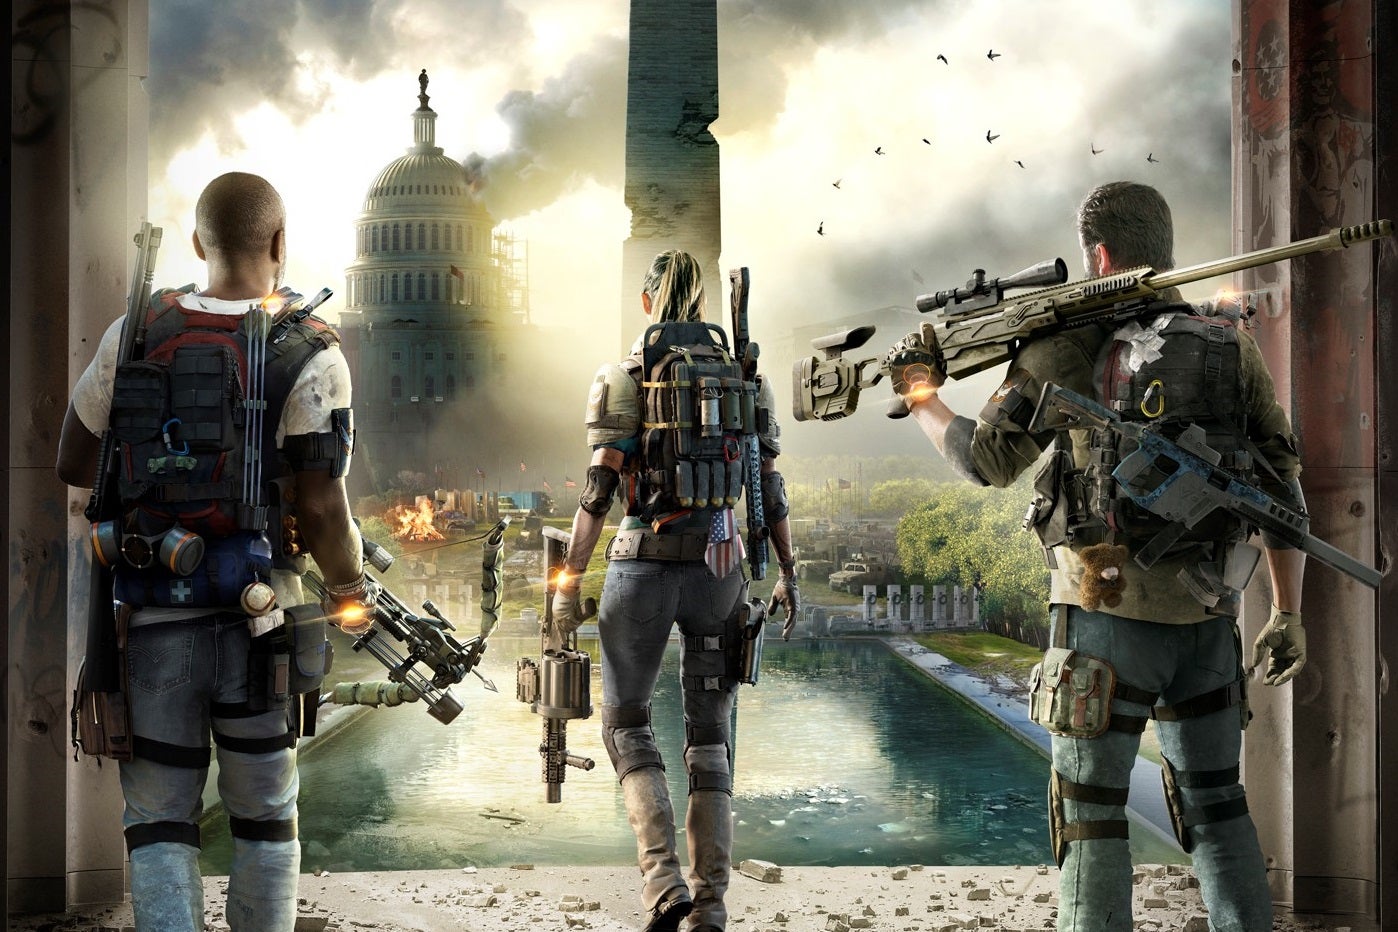 Image for Ubisoft explains why The Division 2 ditched Steam, says PC pre-orders already beating original game